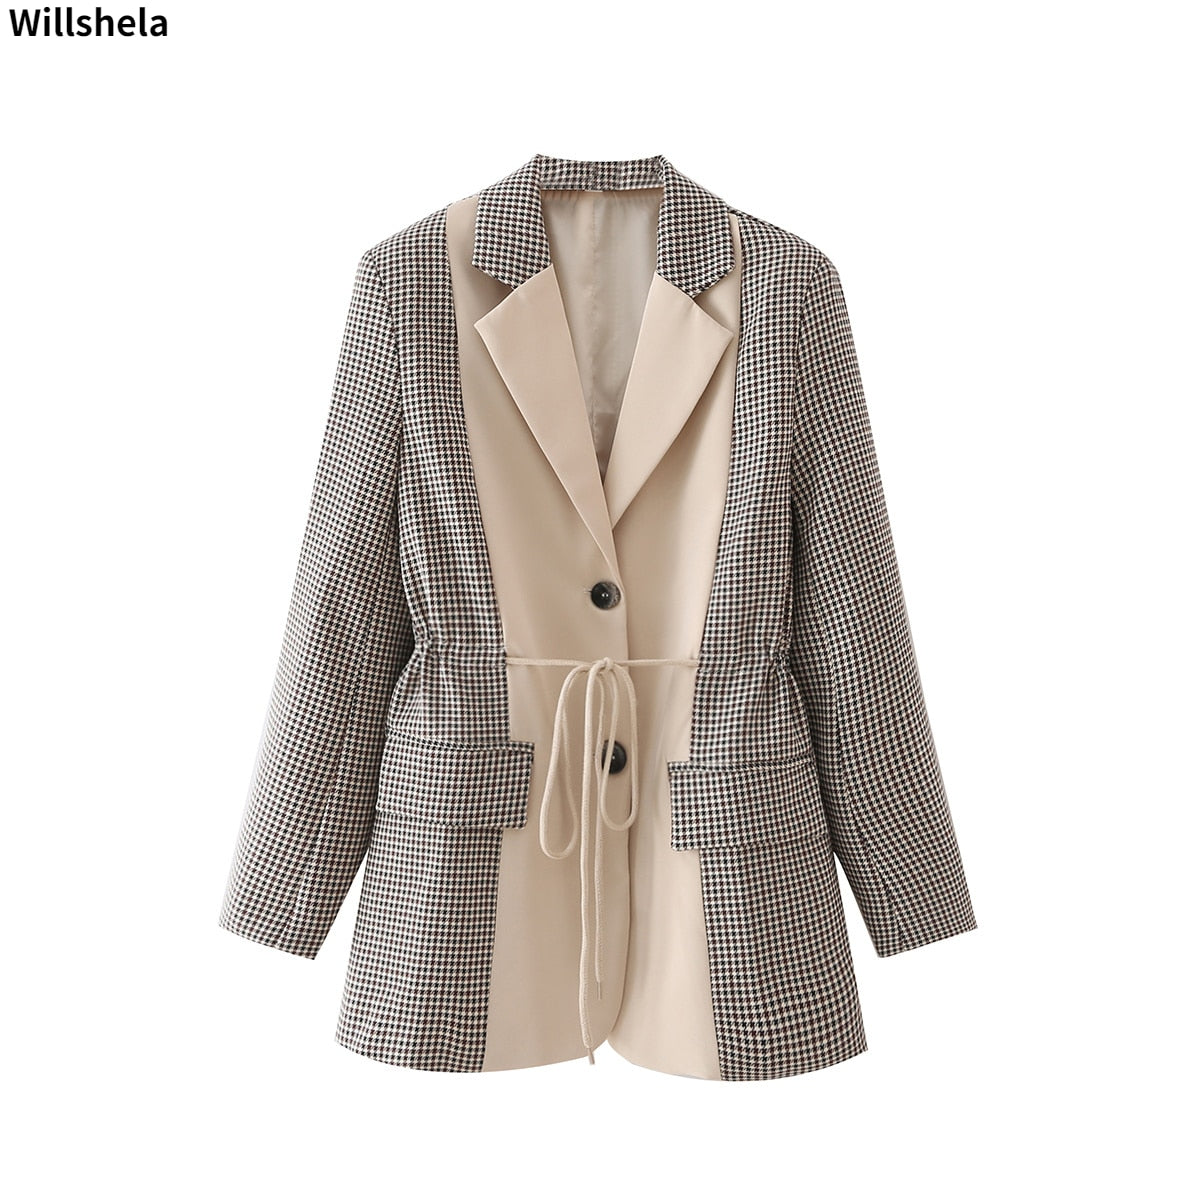 Willshela Women Fashion With Pockets Single Breasted Patchwork Blazer Notched Neck Long Sleeve Vintage Female Coats Chic Tops